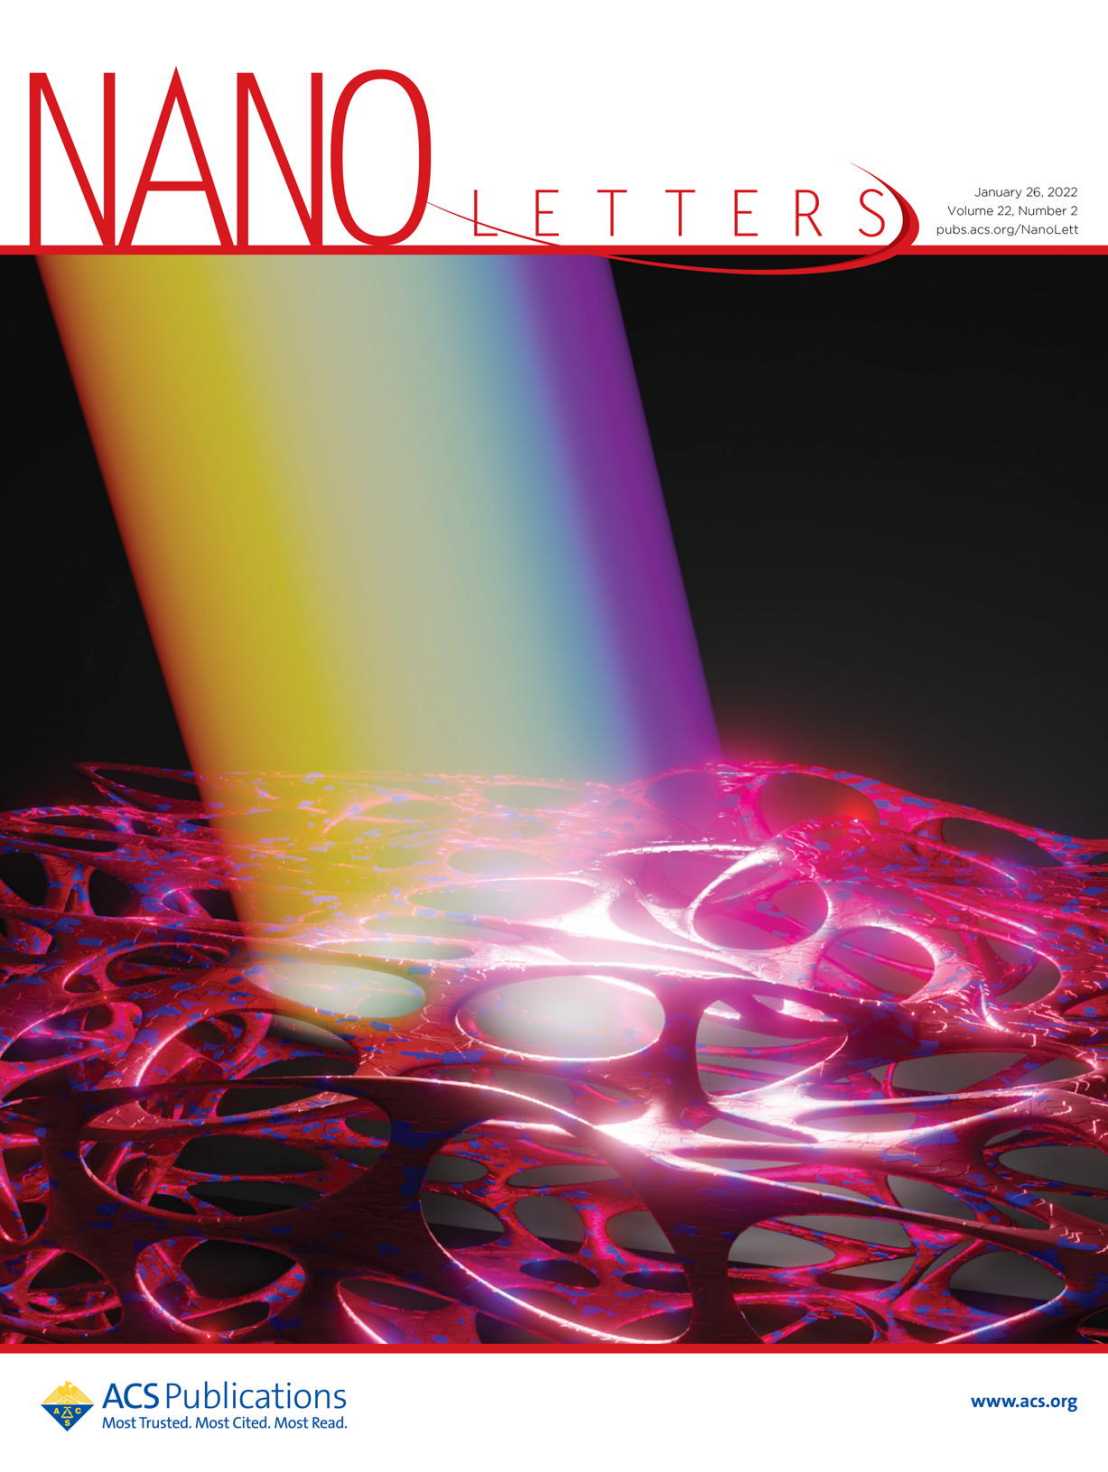 Research is now published and featured on the supplementary cover of Nano Letters.